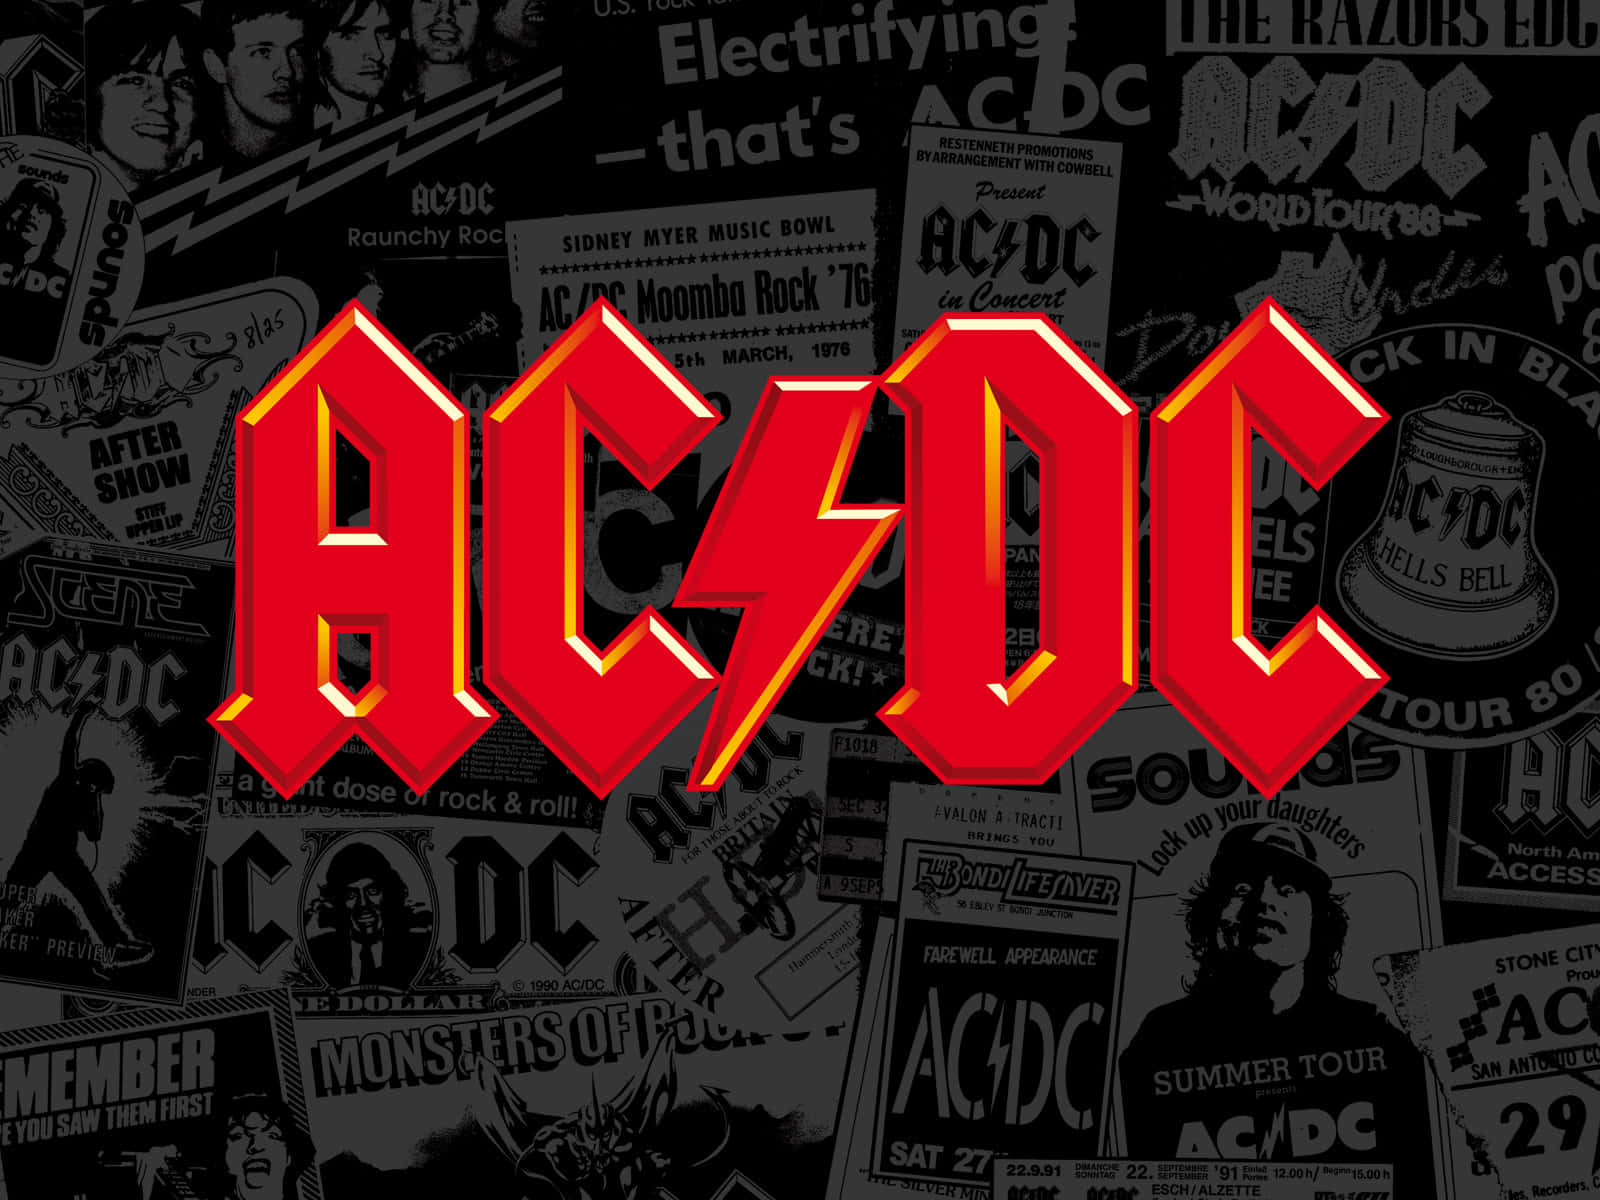 The Legendary Rock Band Ac/dc